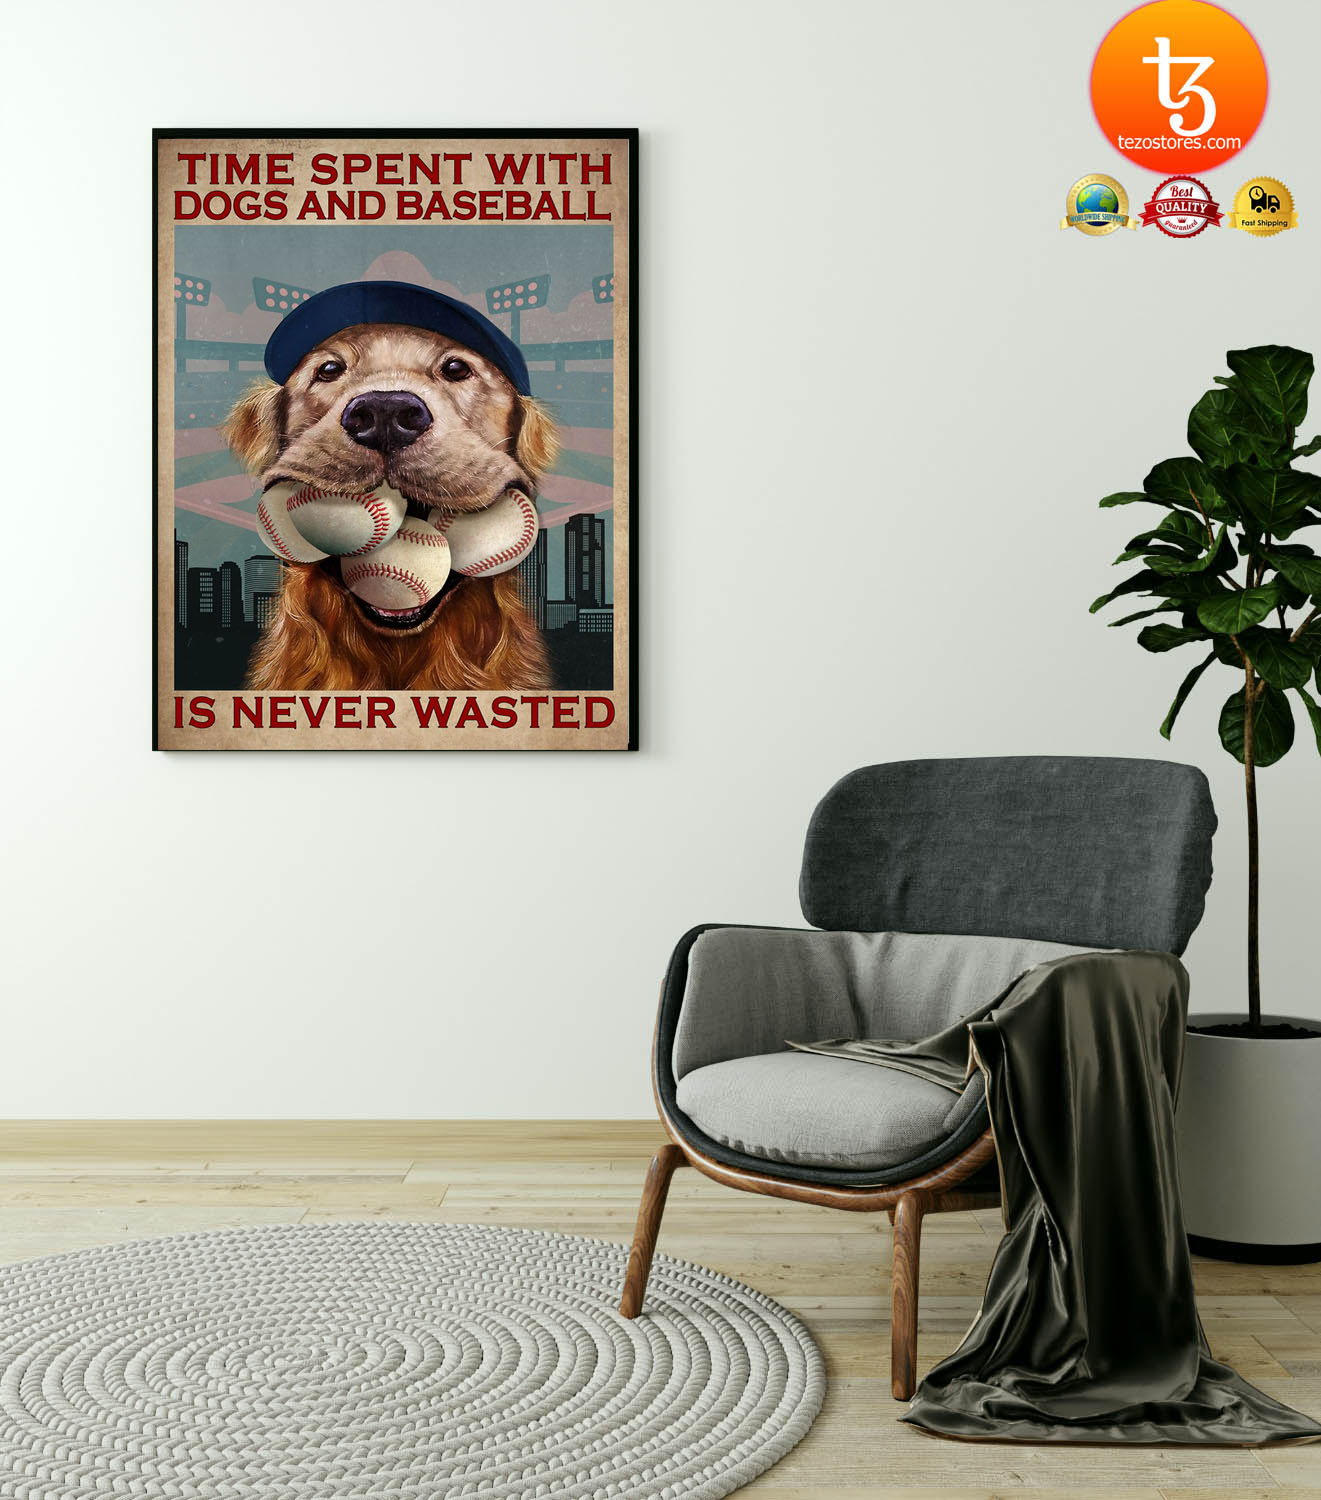 Time spent with dogs and baseball is never wasted poster6